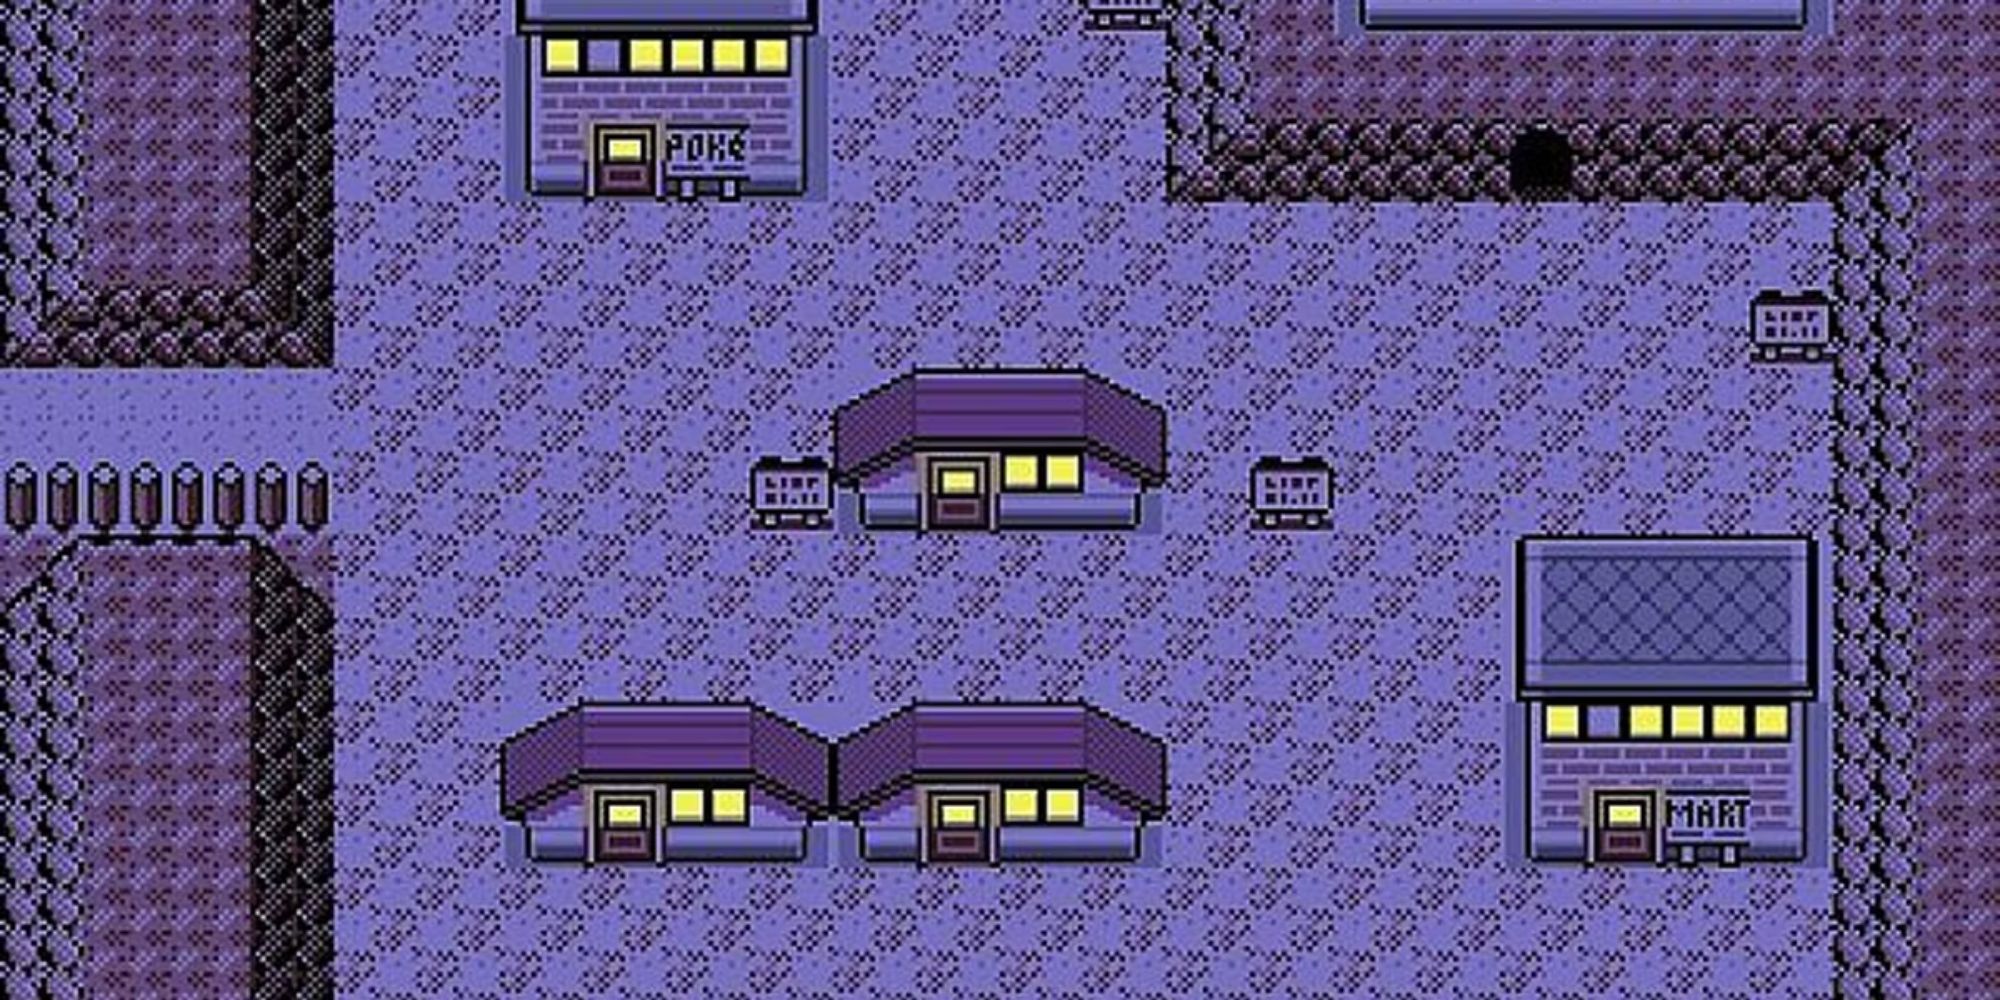 Still of the Lavender Town map from Pokemon Red and Blue in a purple hue.